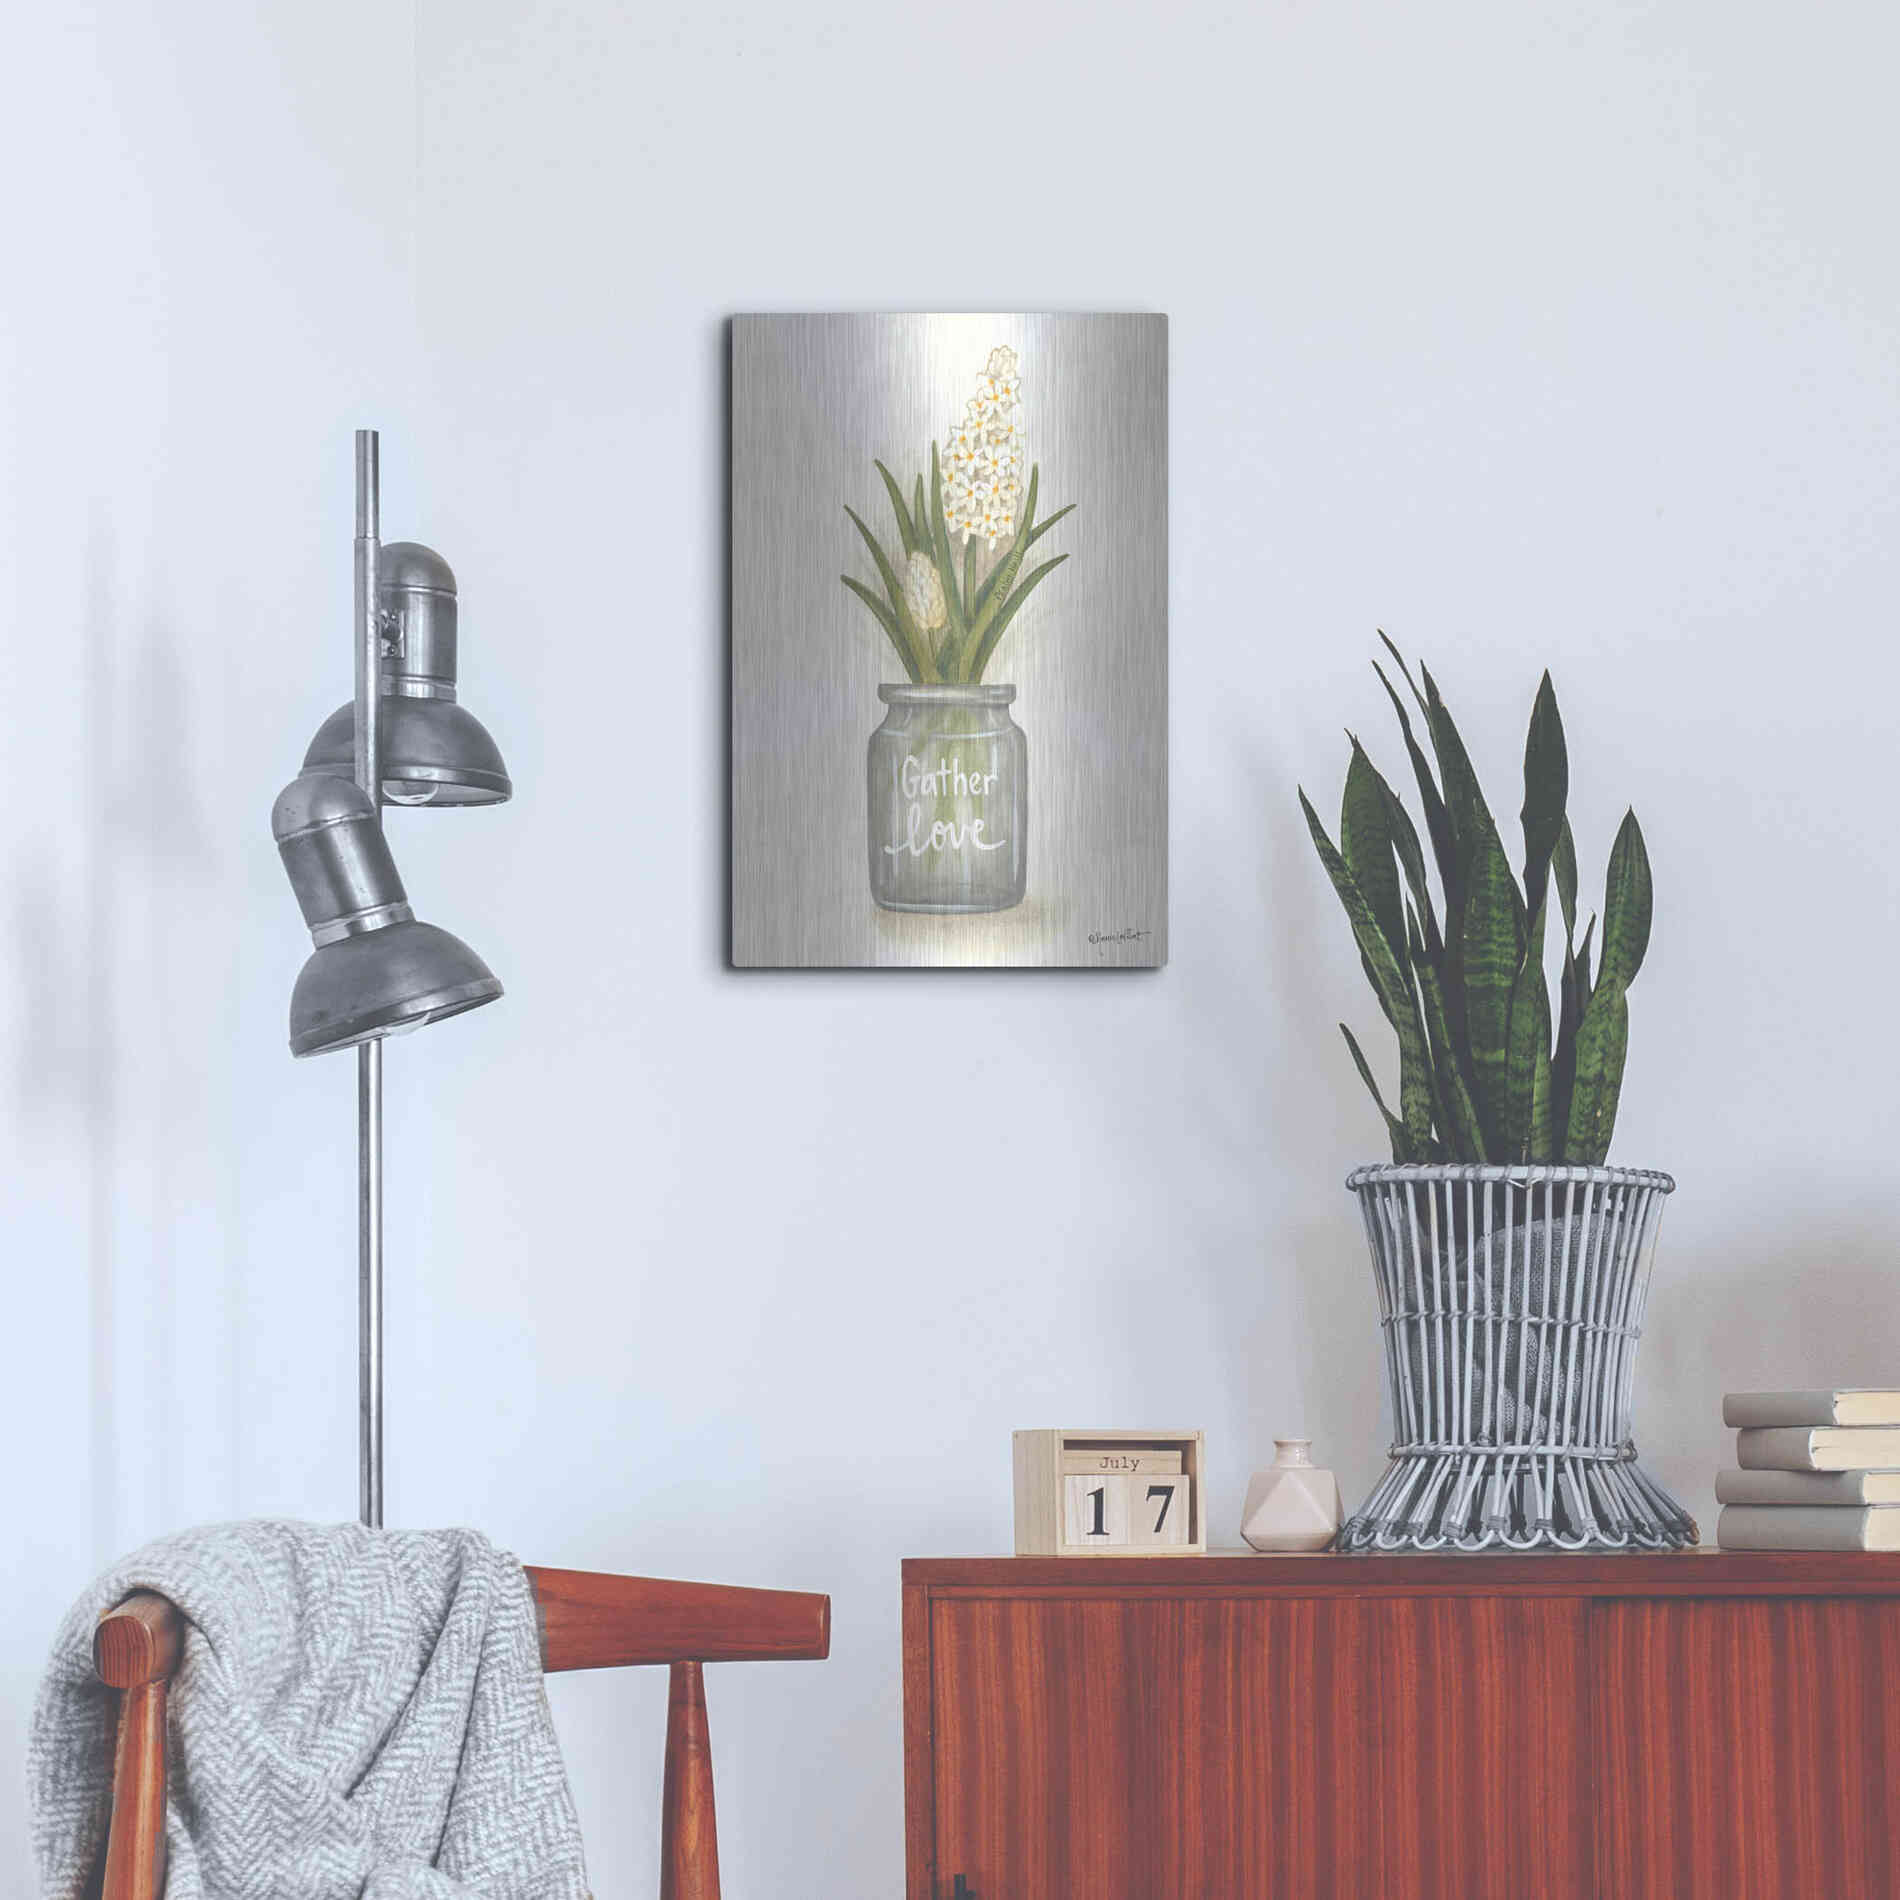 Luxe Metal Art 'Gather Love Hyacinth' by Annie LaPoint, Metal Wall Art,16x24